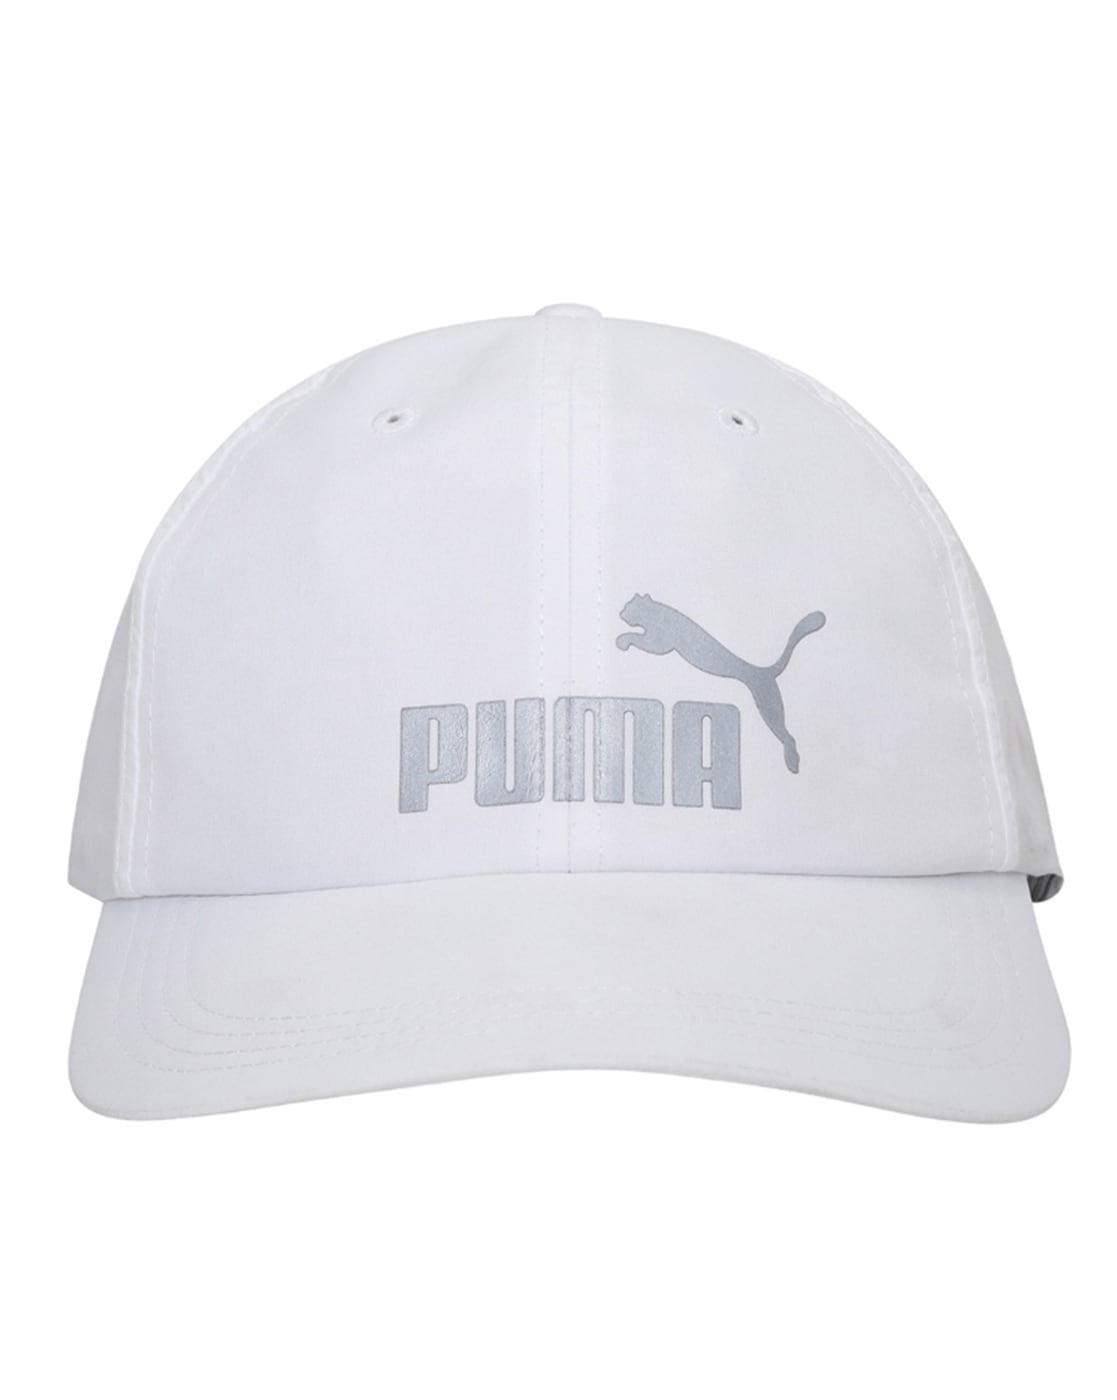 Buy White Caps & by Puma for Men Online Hats